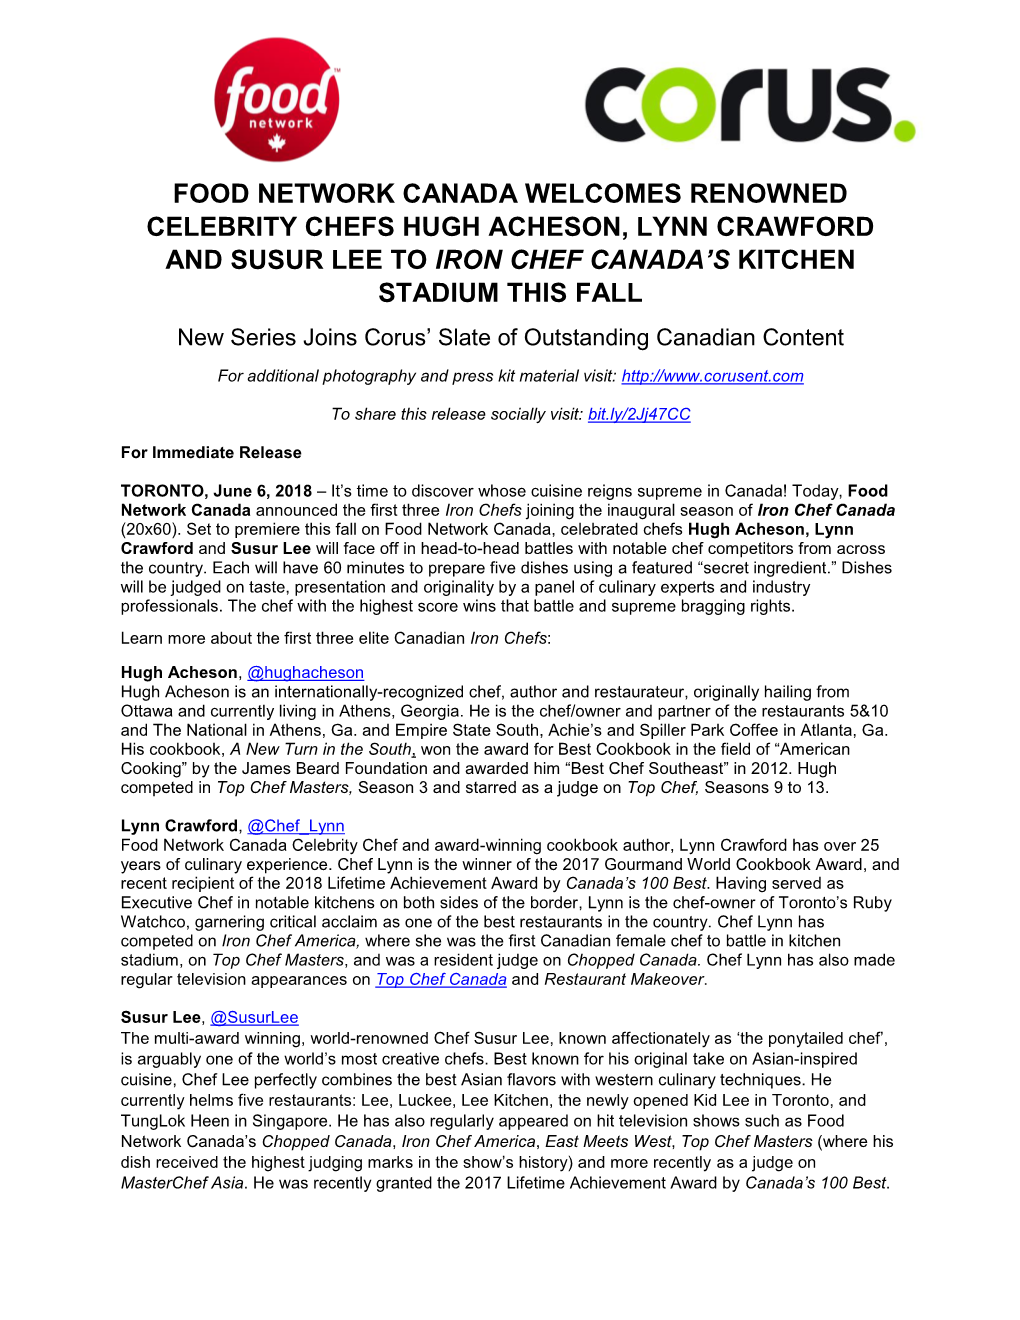 Food Network Canada Welcomes Renowned